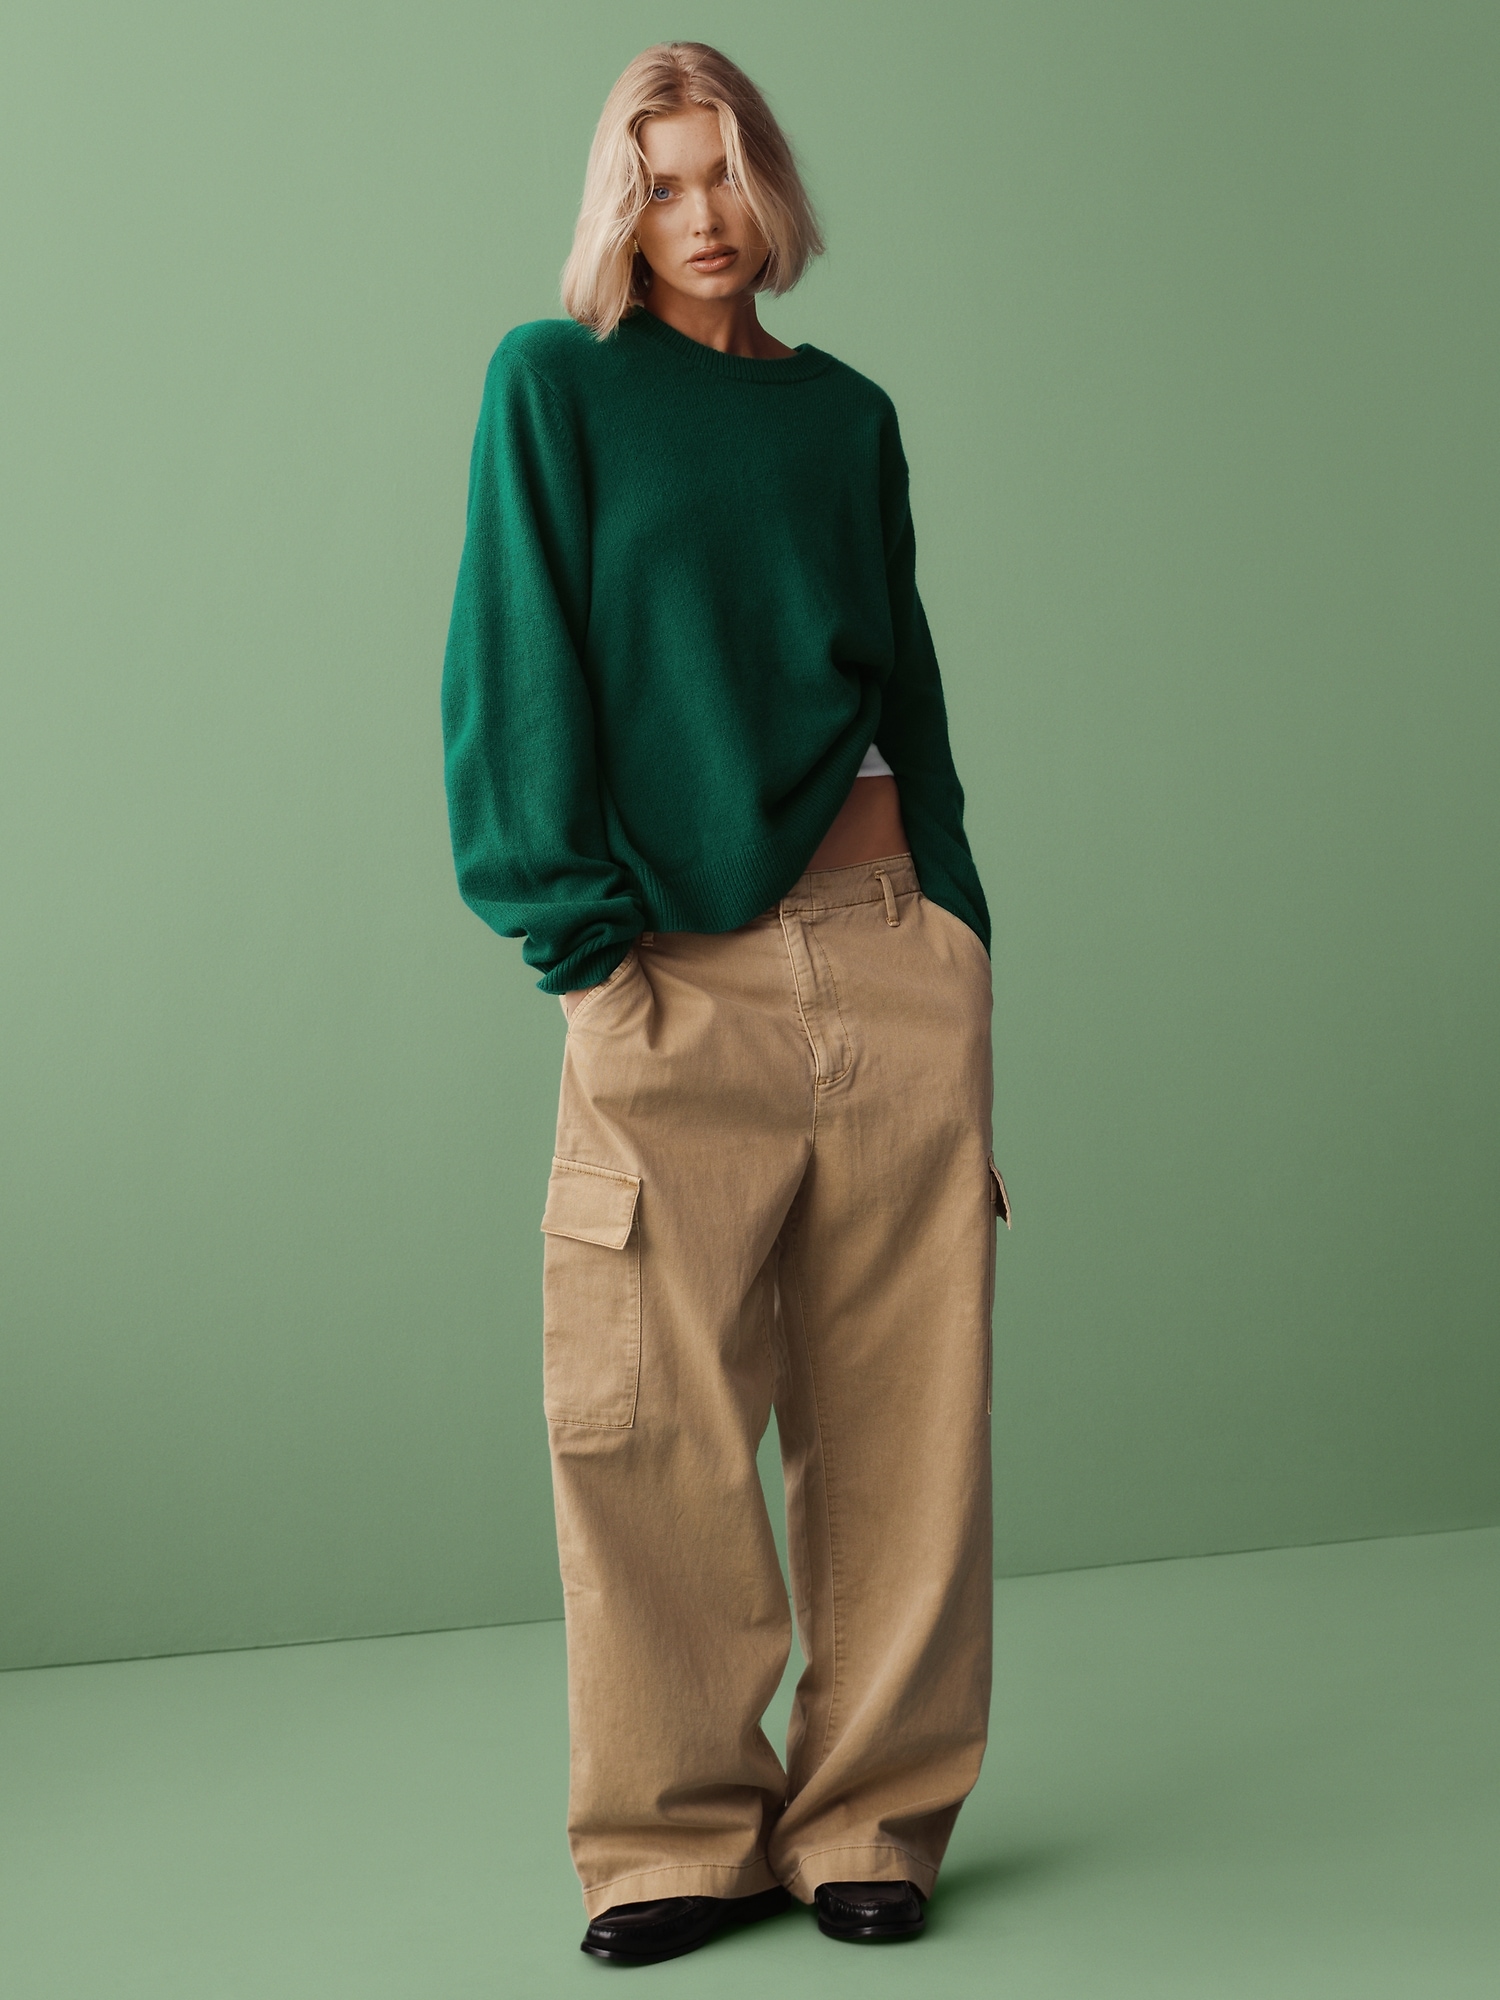 Buy Khaki Mid Rise Slim Fit Pants for Women, ONLY